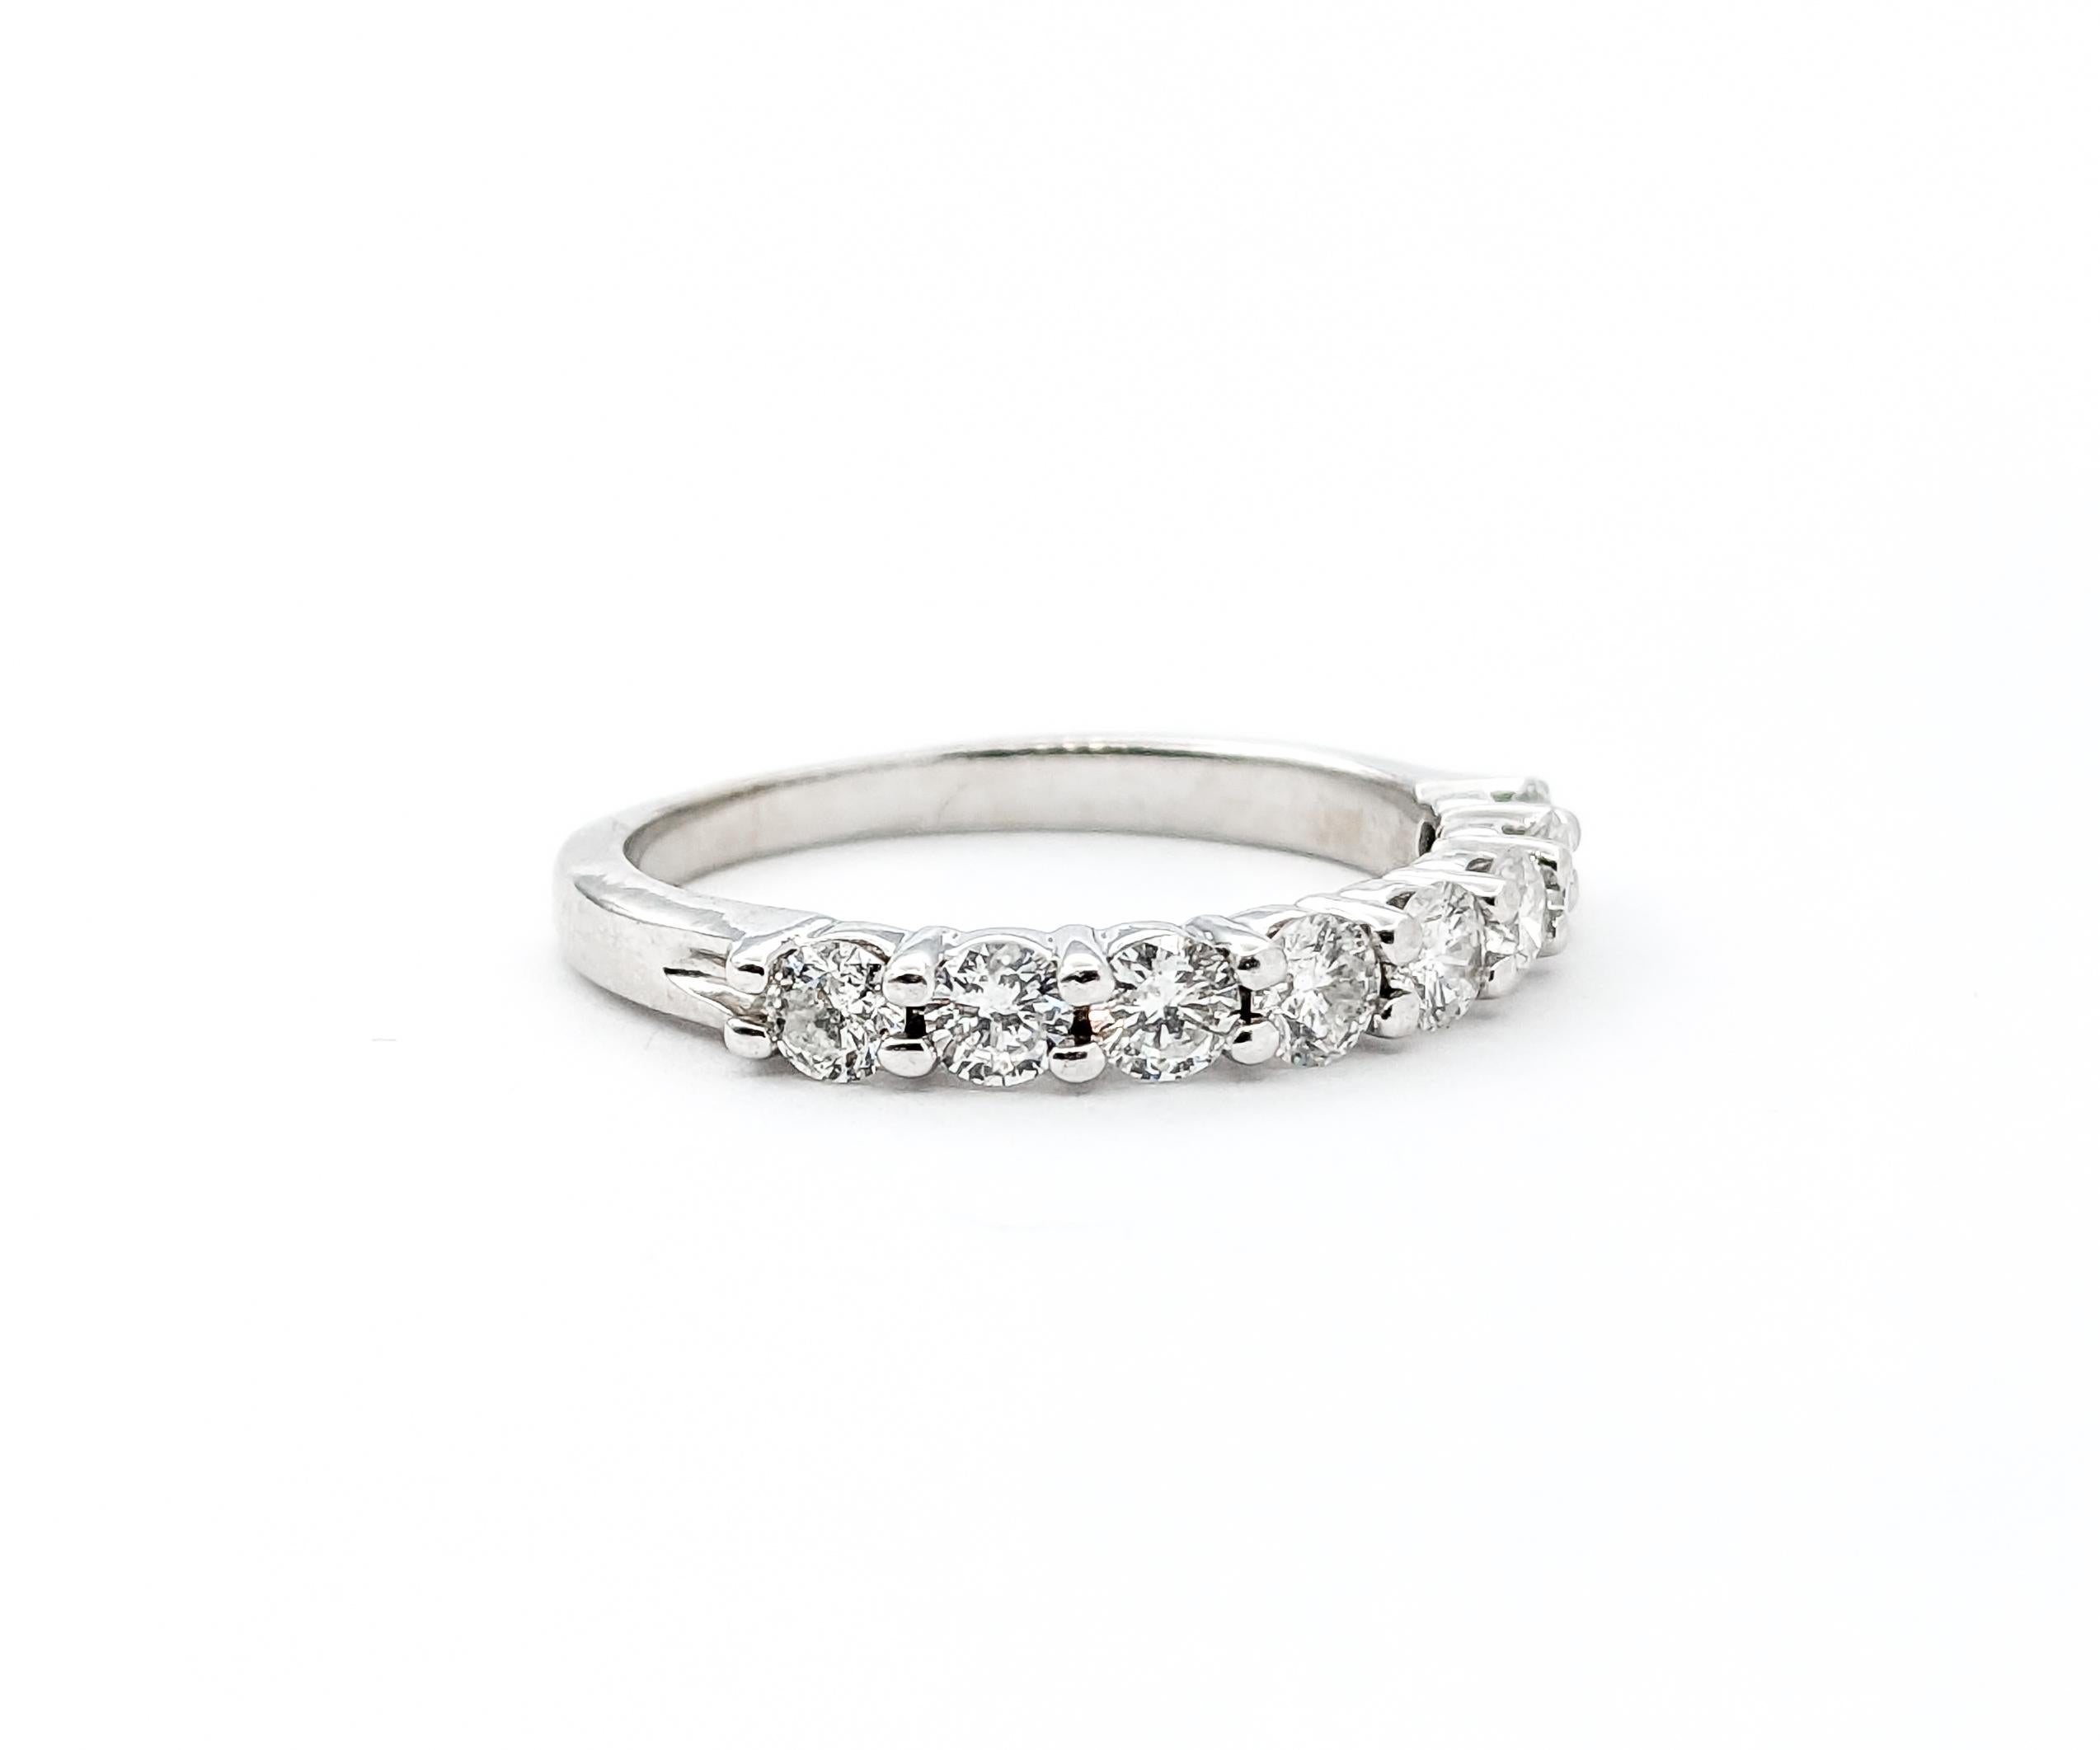 1ctw Diamond Bridal Ring In White Gold For Sale 1